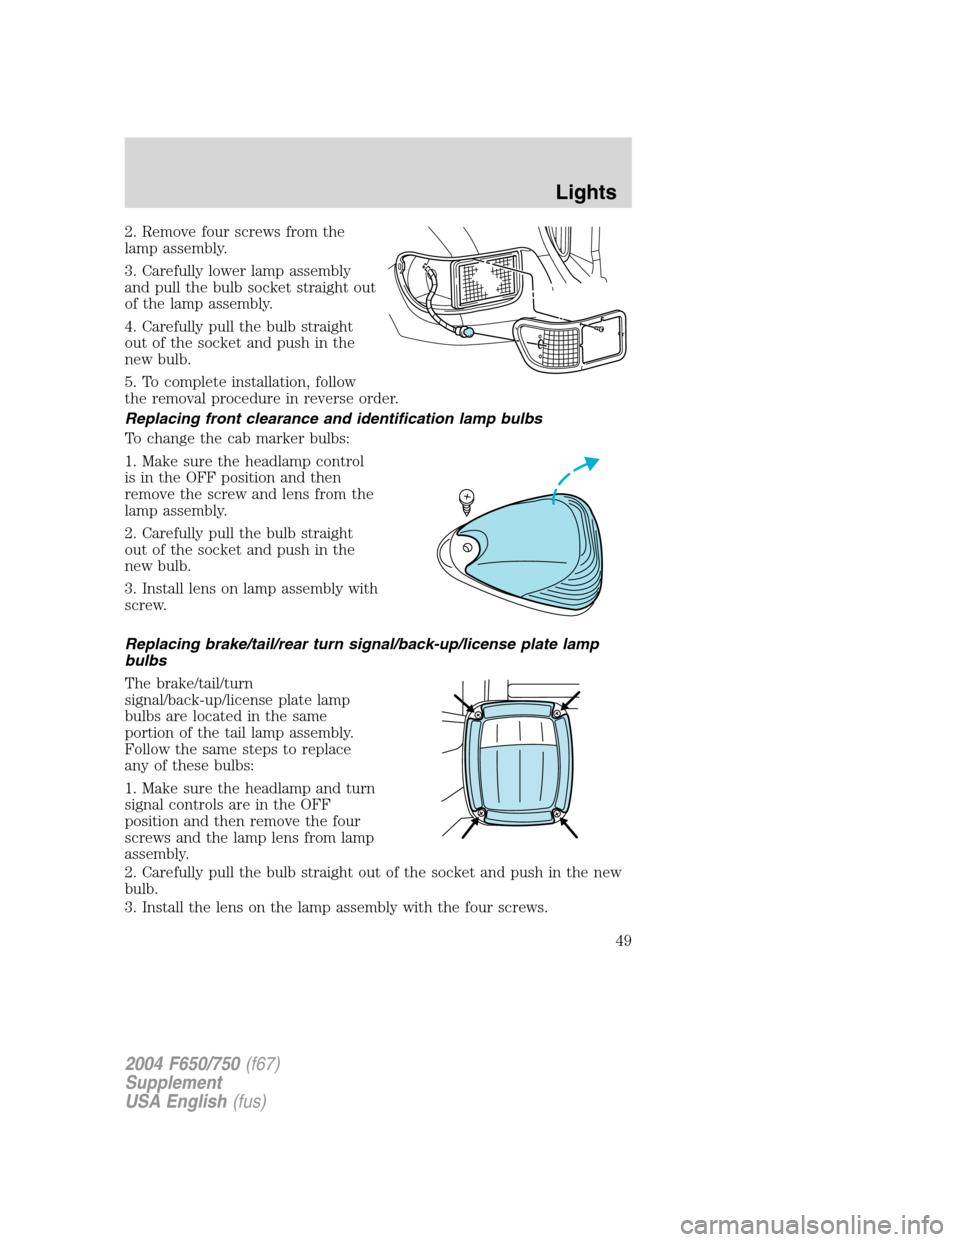 FORD F650 2004 11.G Service Manual 2. Remove four screws from the
lamp assembly.
3. Carefully lower lamp assembly
and pull the bulb socket straight out
of the lamp assembly.
4. Carefully pull the bulb straight
out of the socket and pus